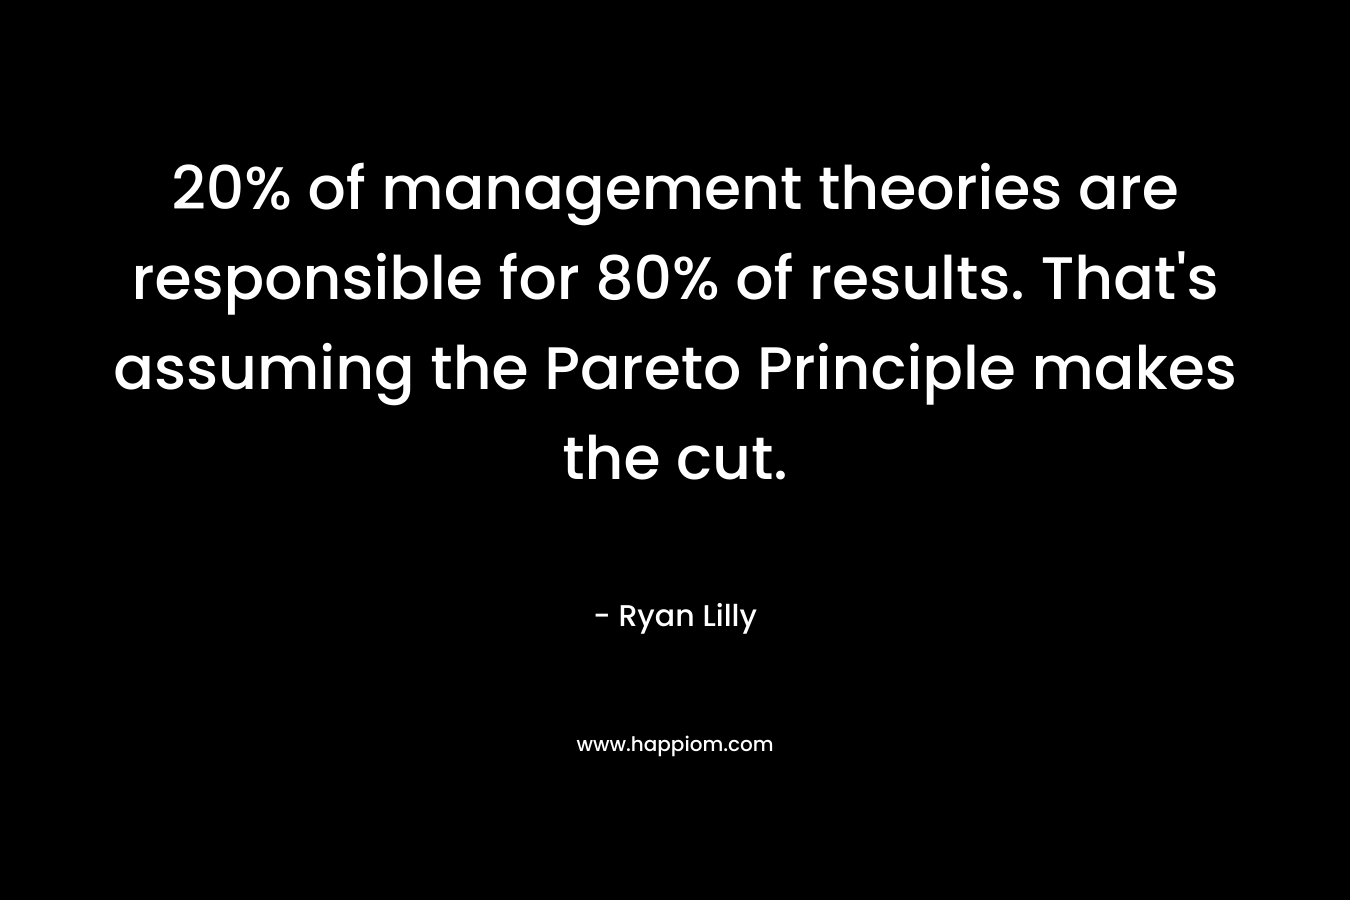 20% of management theories are responsible for 80% of results. That’s assuming the Pareto Principle makes the cut. – Ryan Lilly